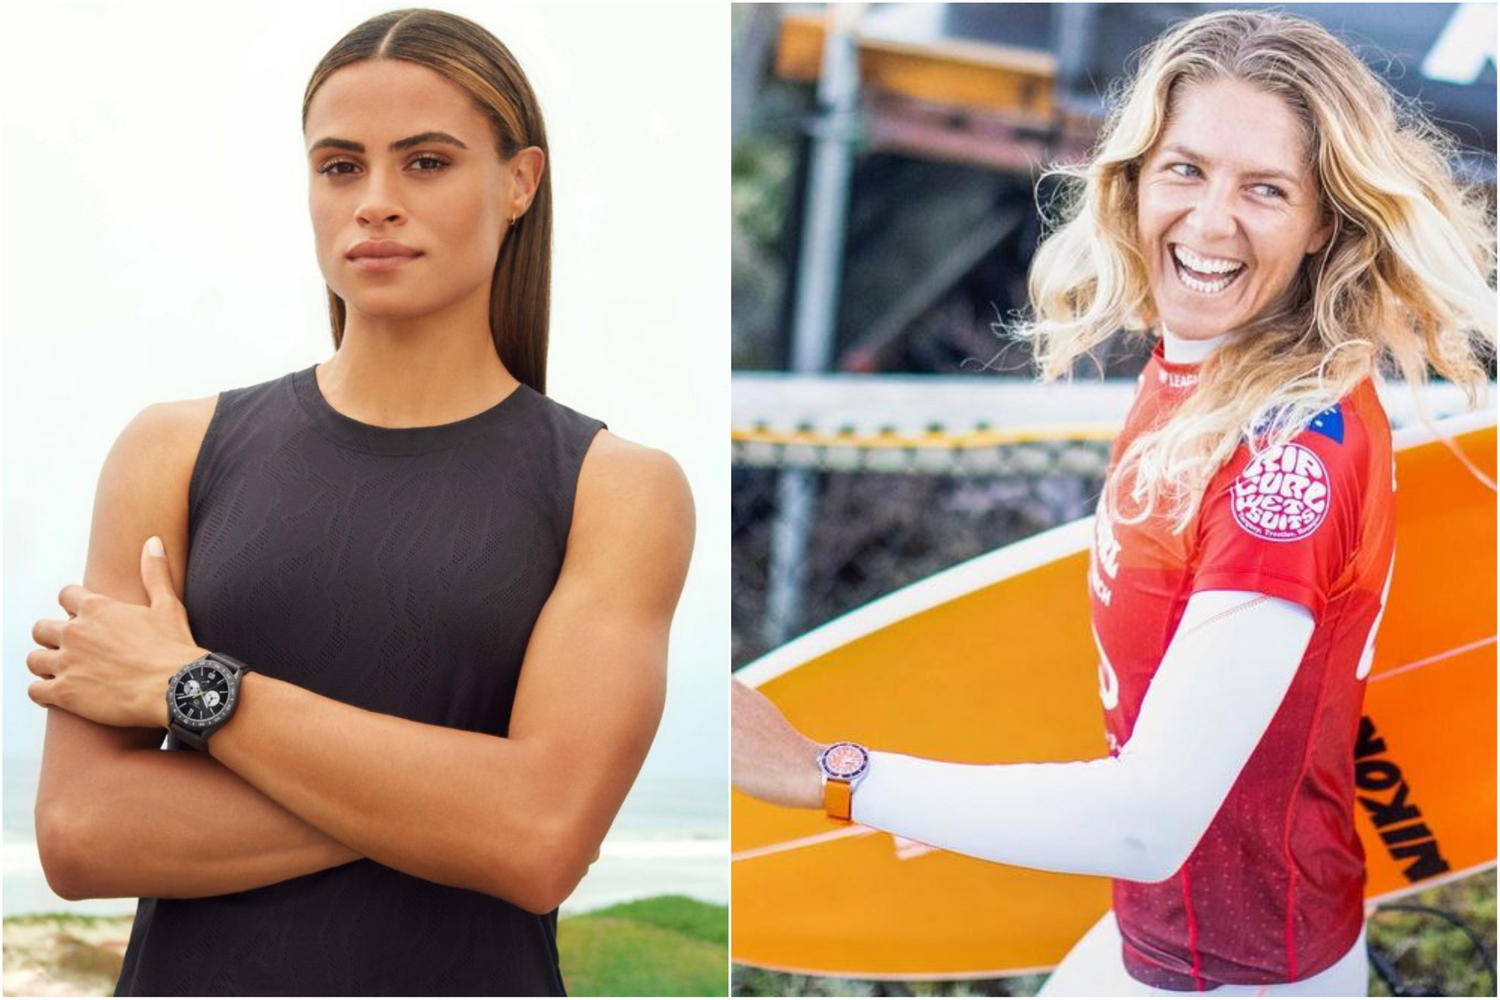 No Rolexes or Pateks – These are the top luxury watches spotted on the Tokyo 2020 Olympic games athletes – From gold medalist Sydney McLaughlin to surfing legend Stephanie Gilmore.